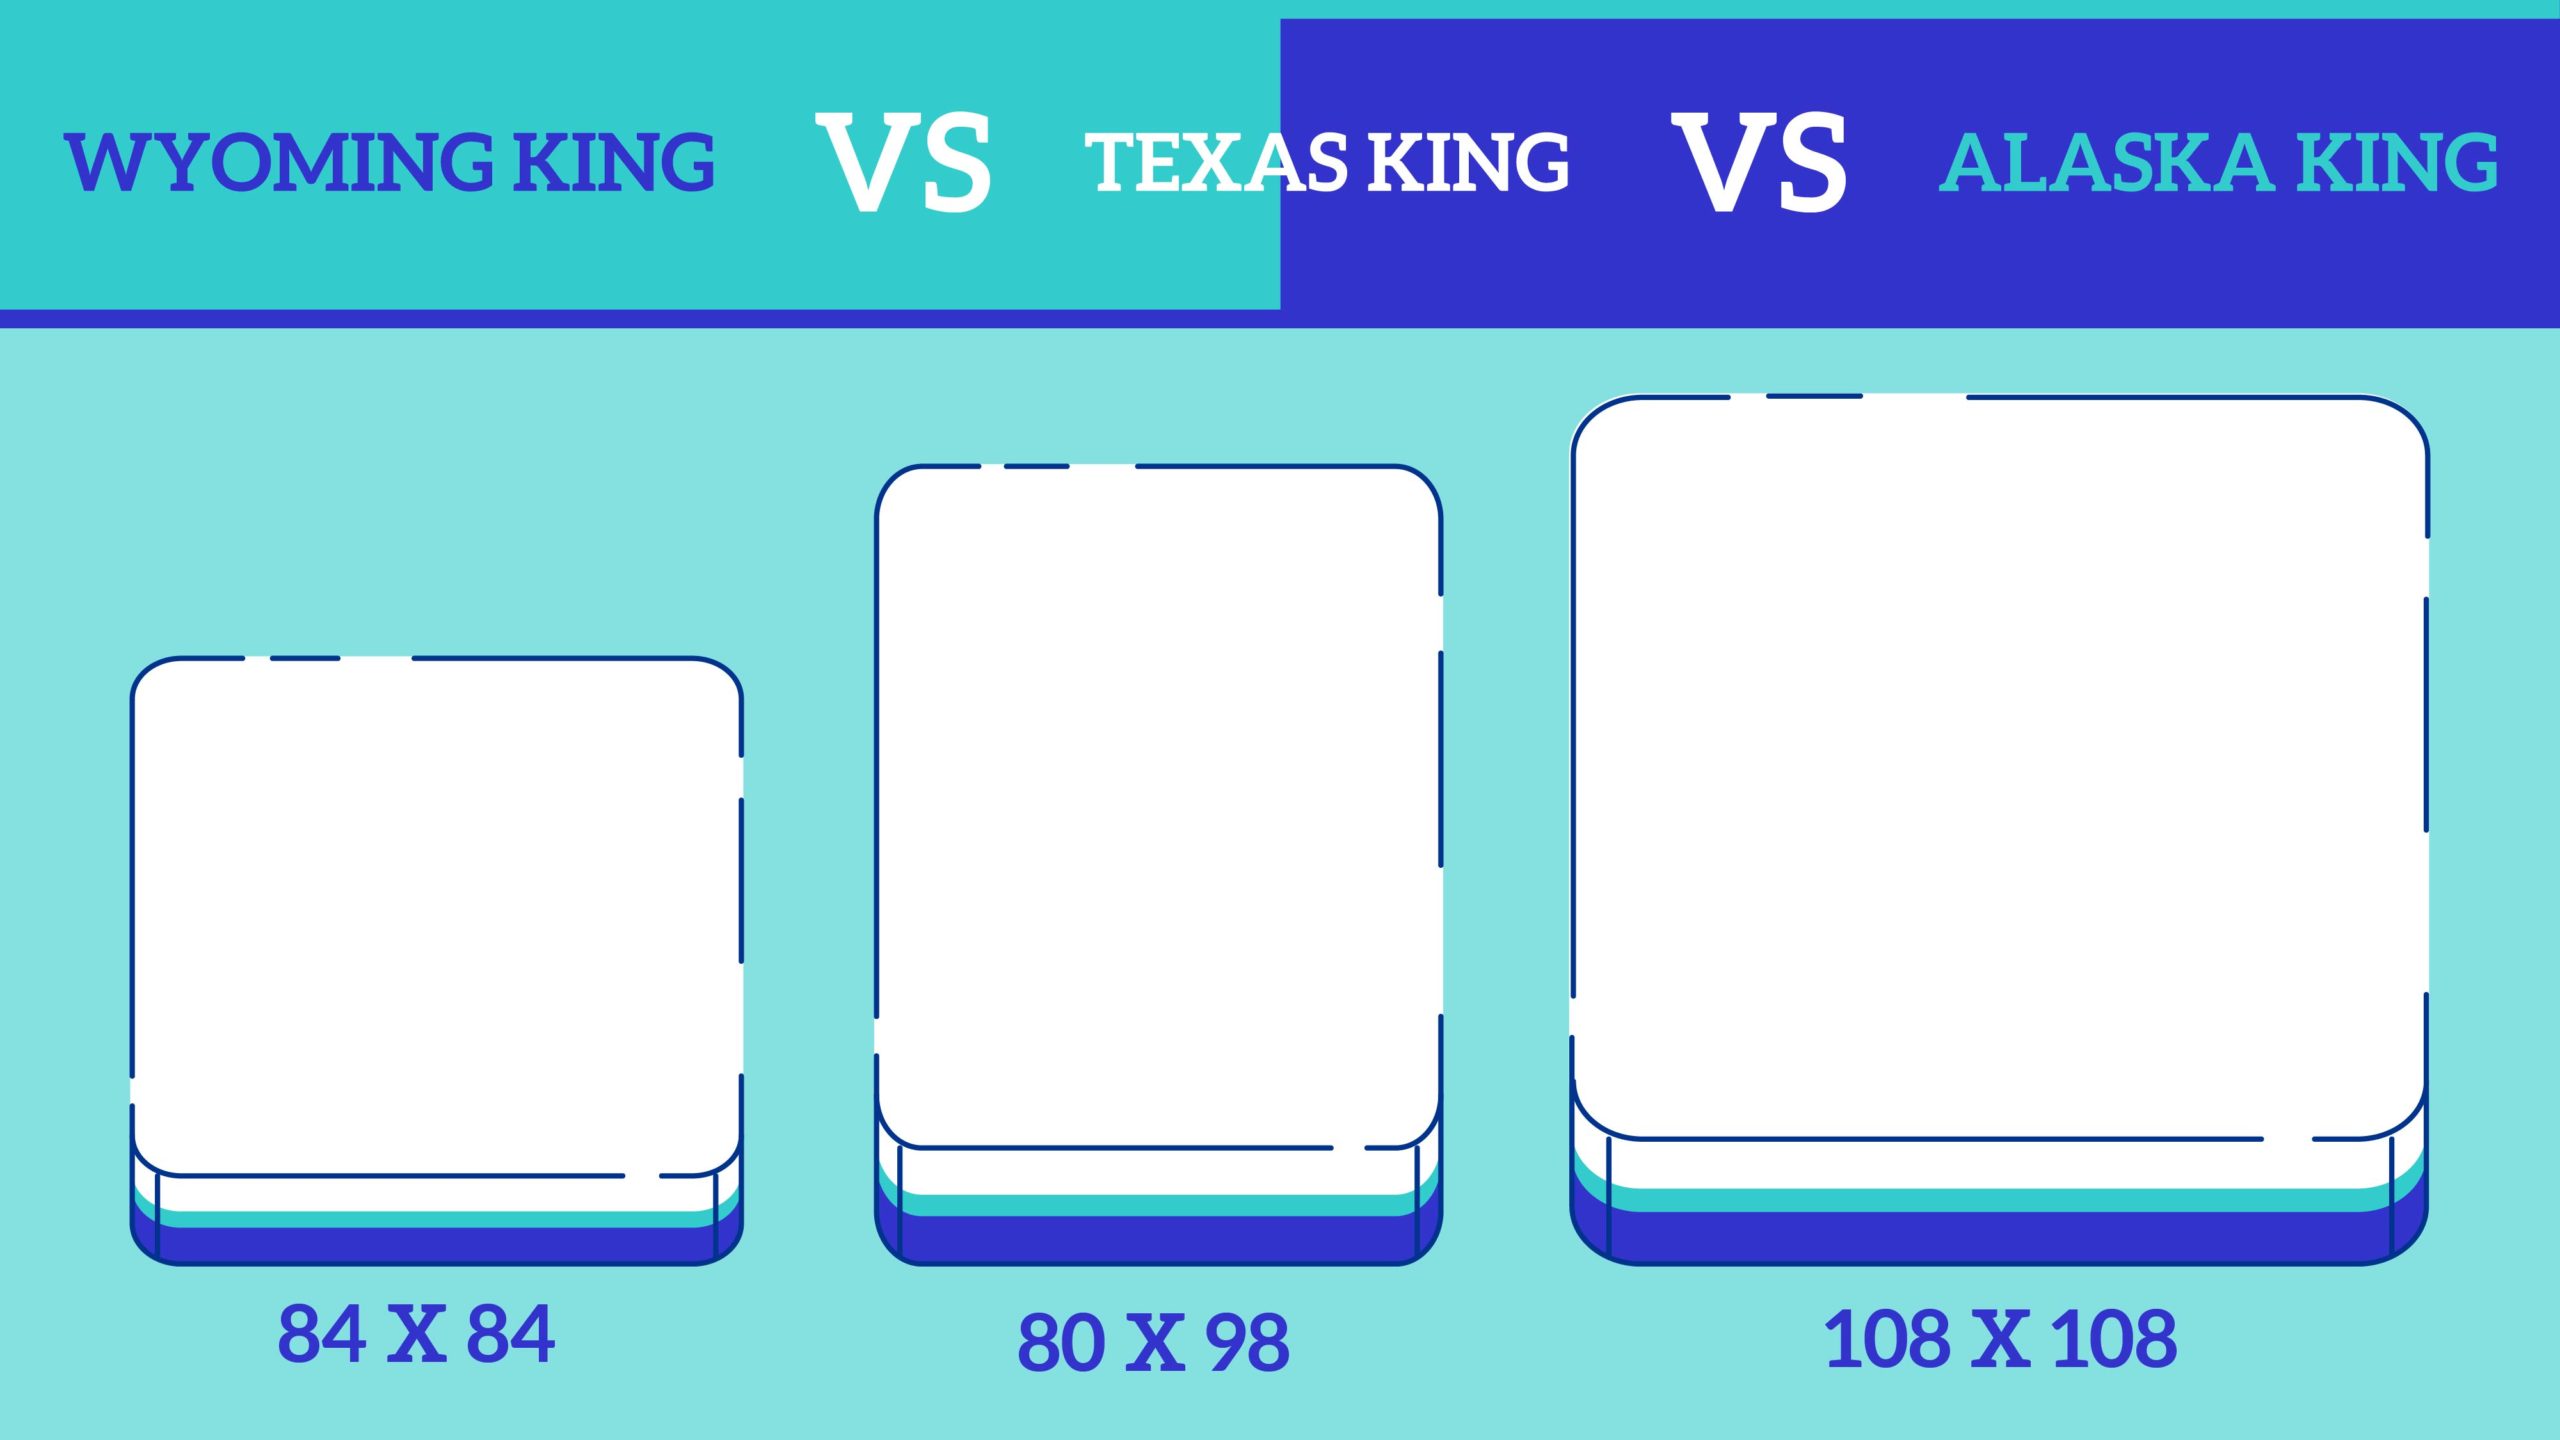 Biggest Bed Size: Wyoming King, Texas King, and Alaskan King